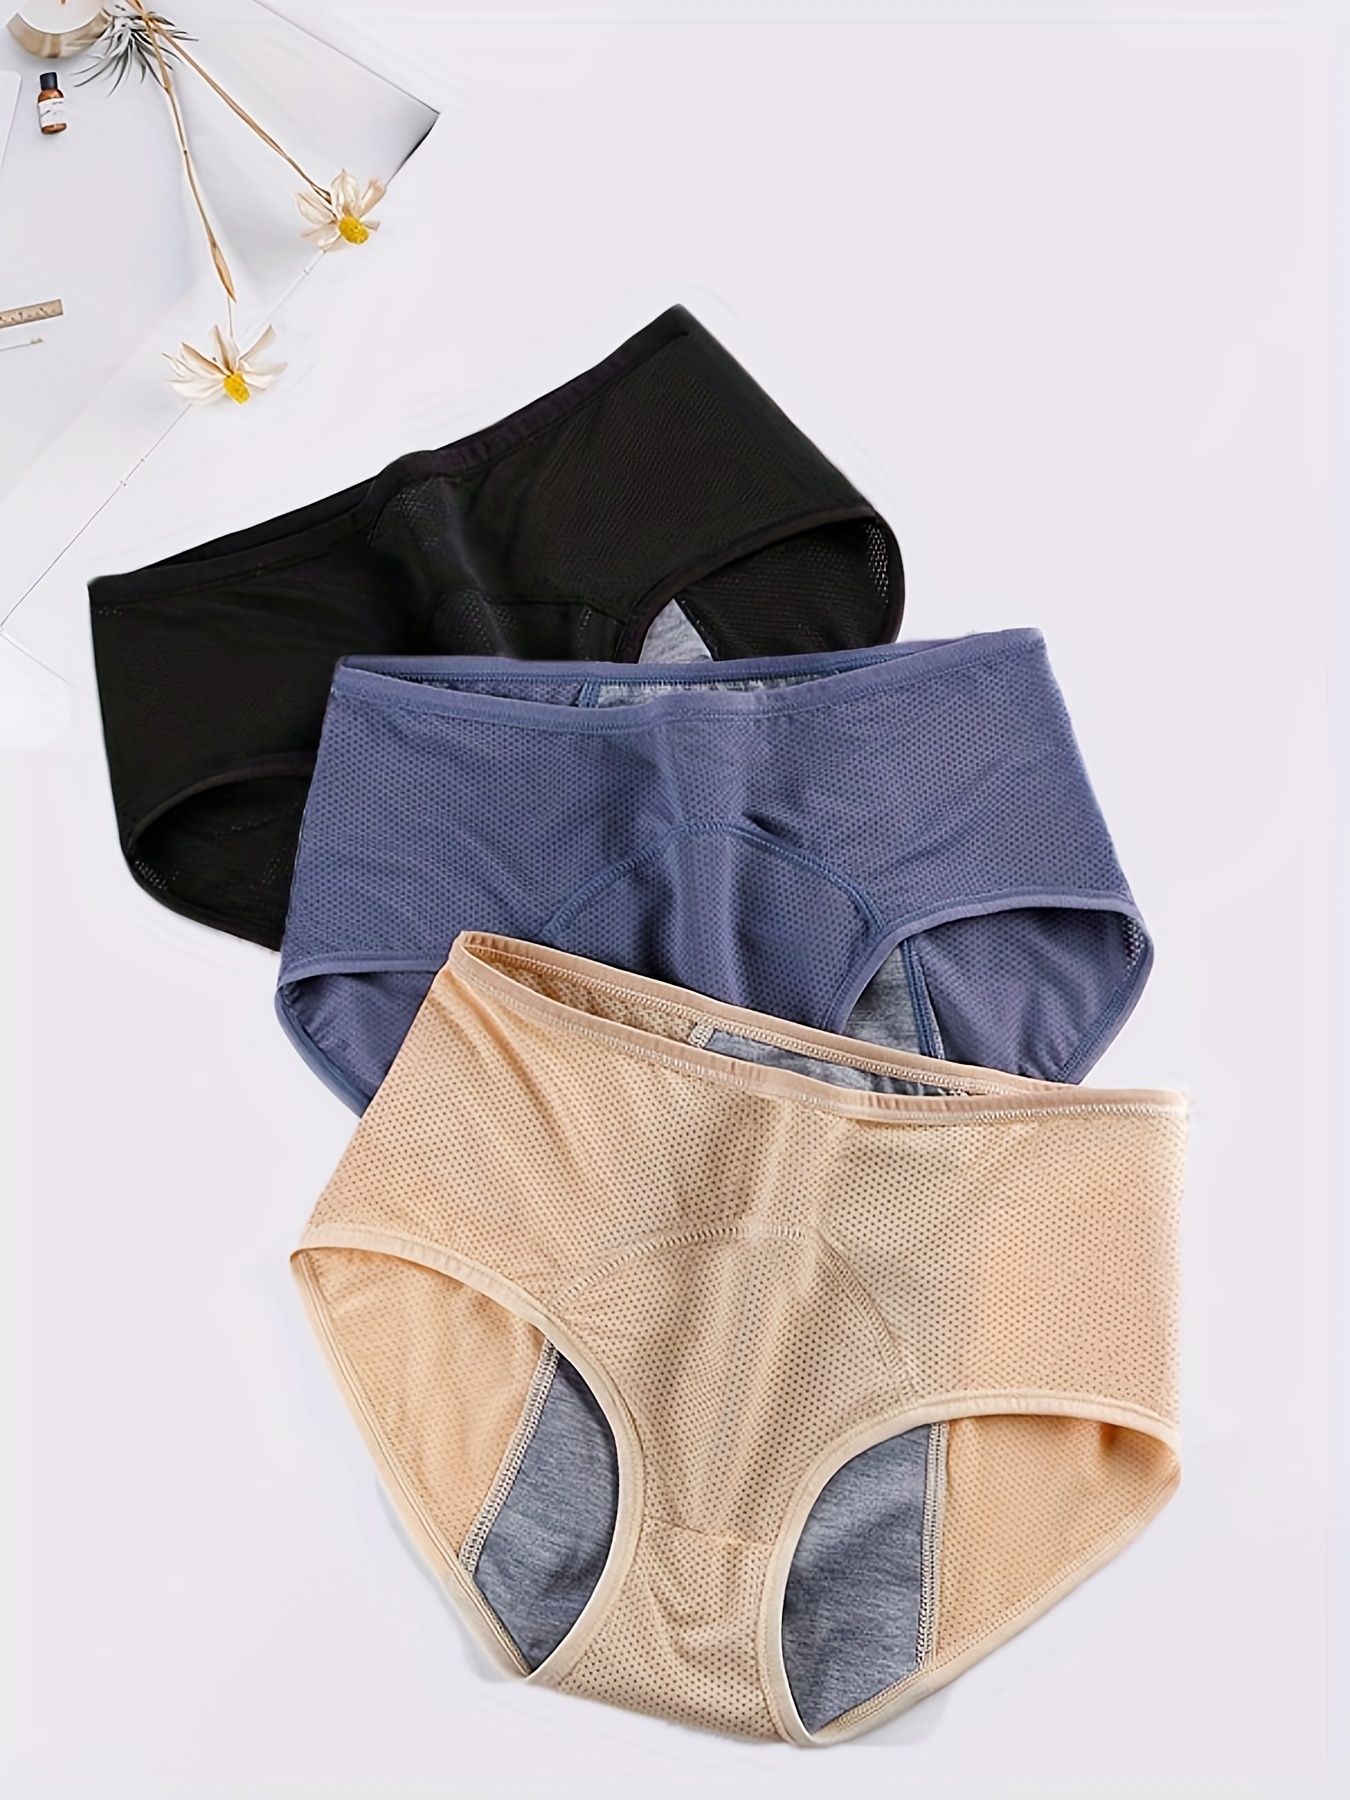 Mesh Underwear For Women Breathable Absorbent Cotton Panties